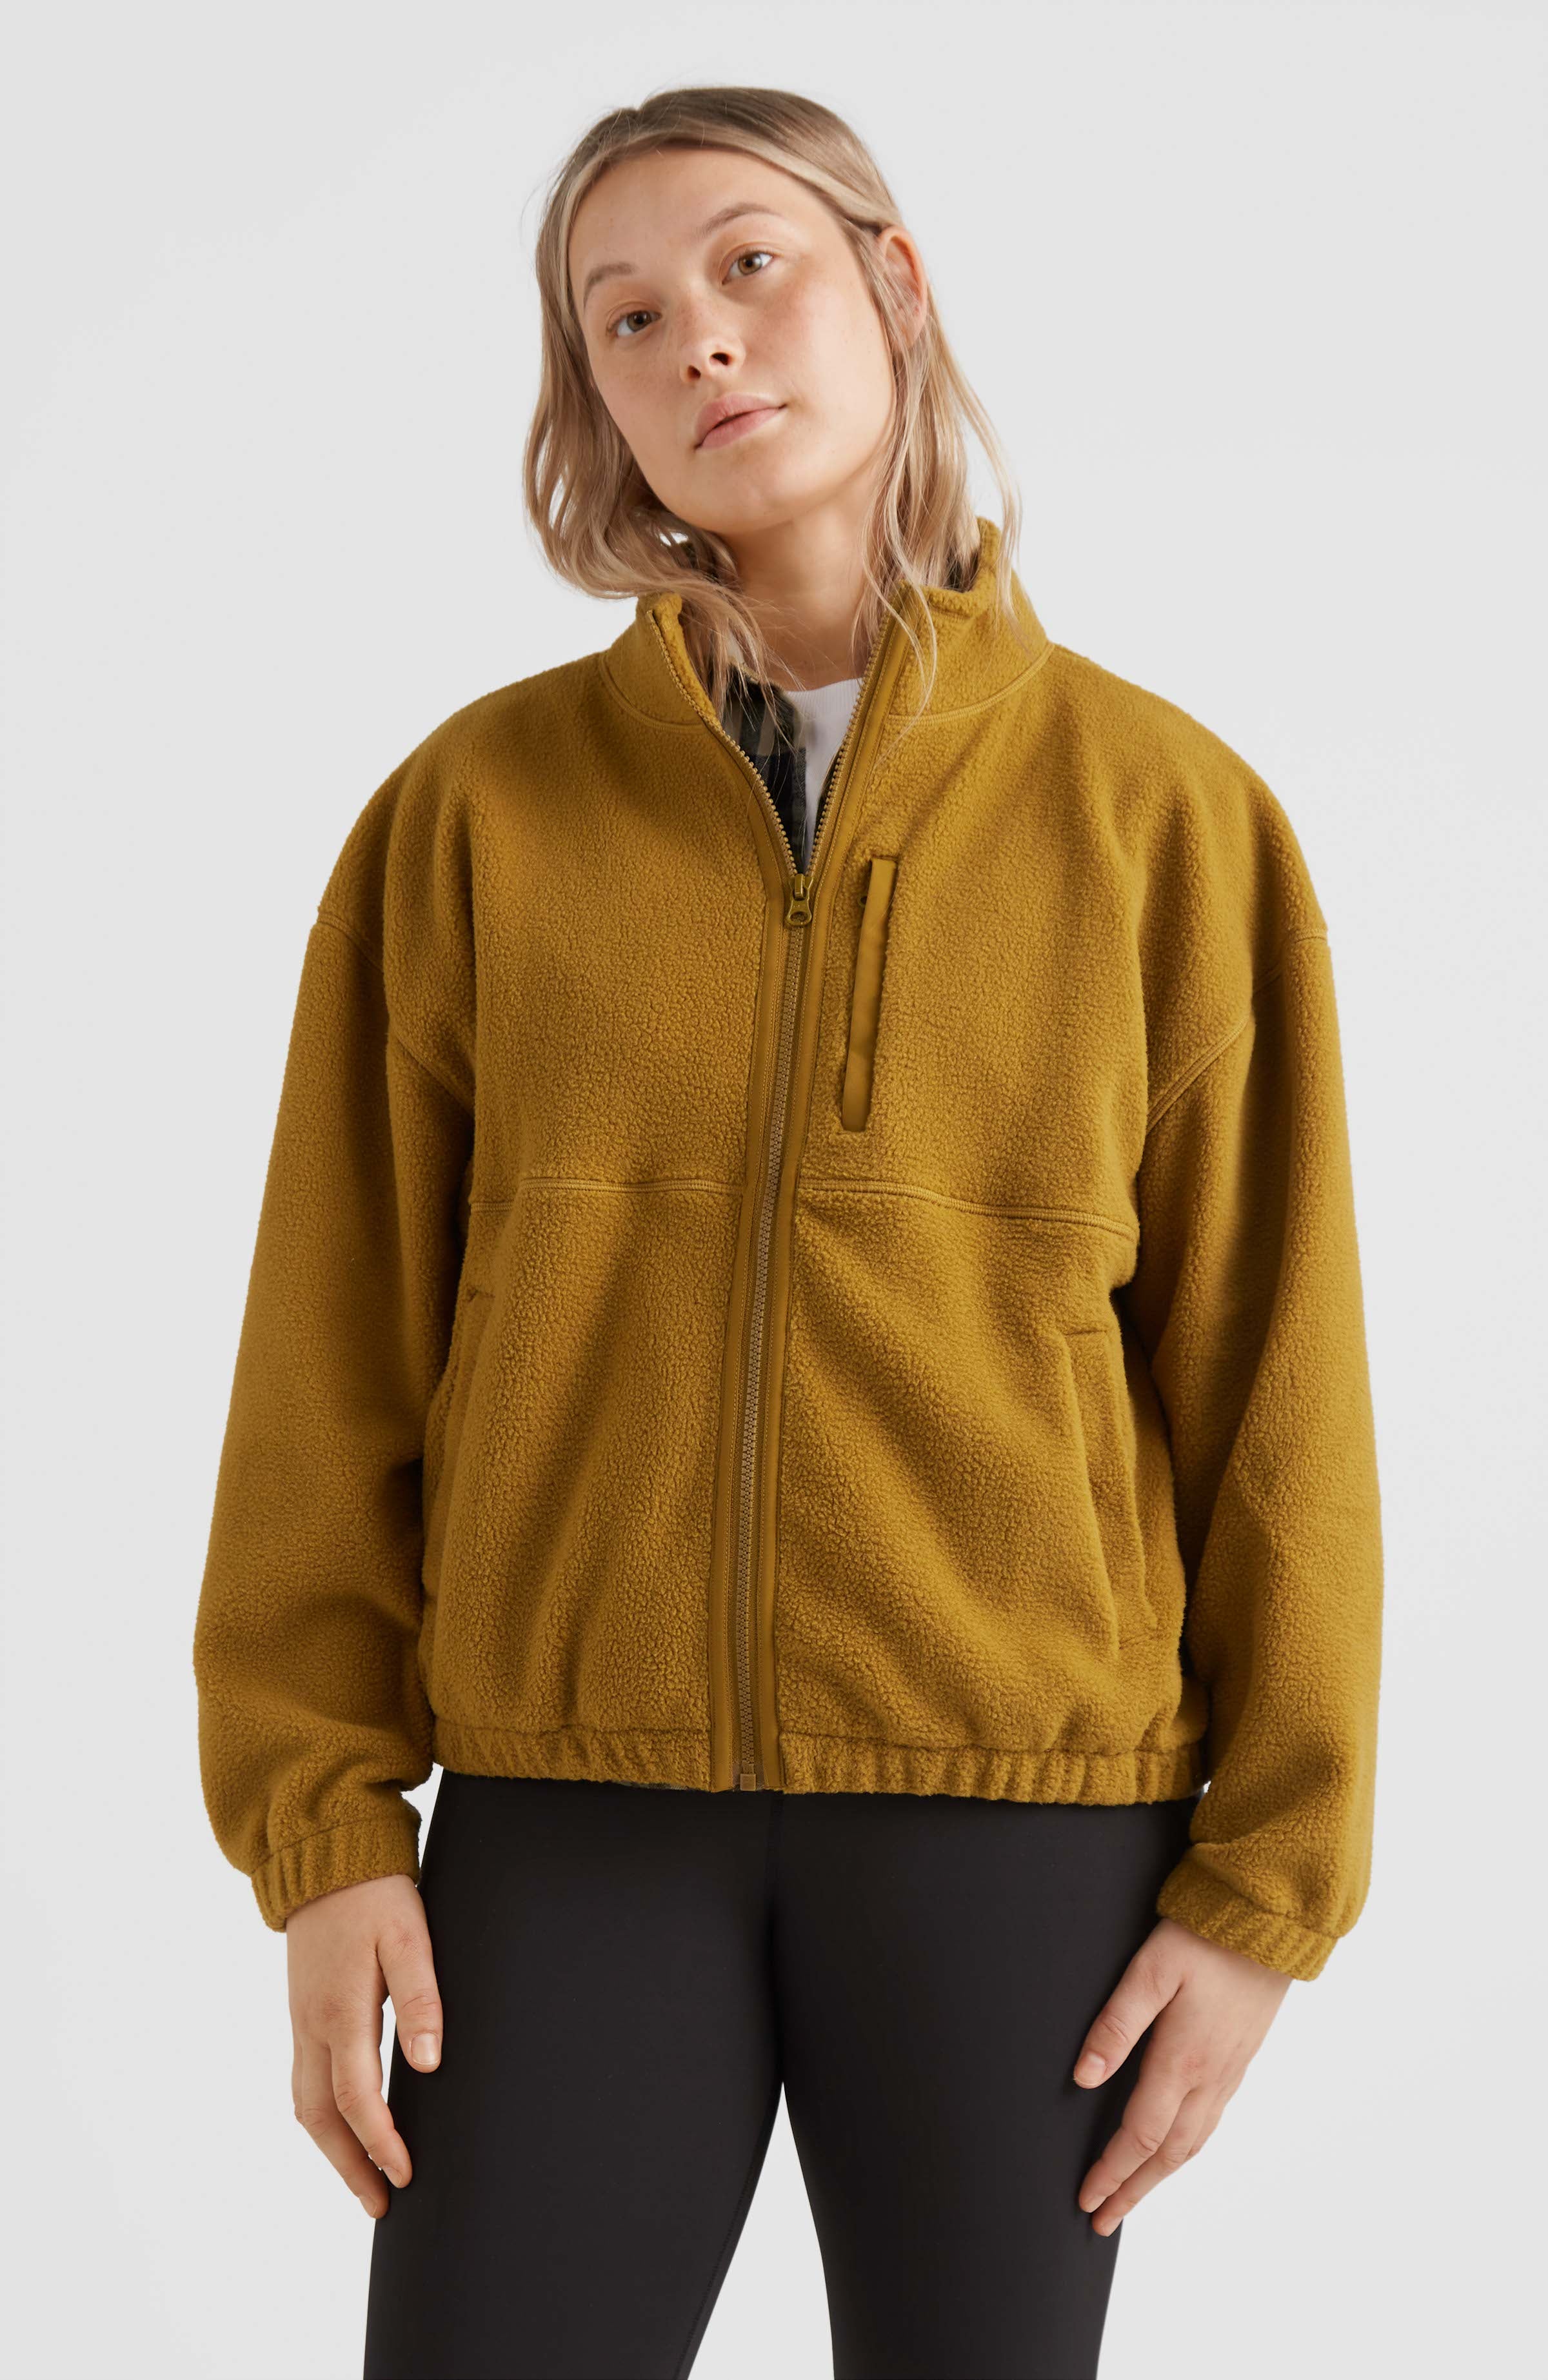 Women's Cragmont Fleece 1/4 Snap - We're Outside Outdoor Outfitters